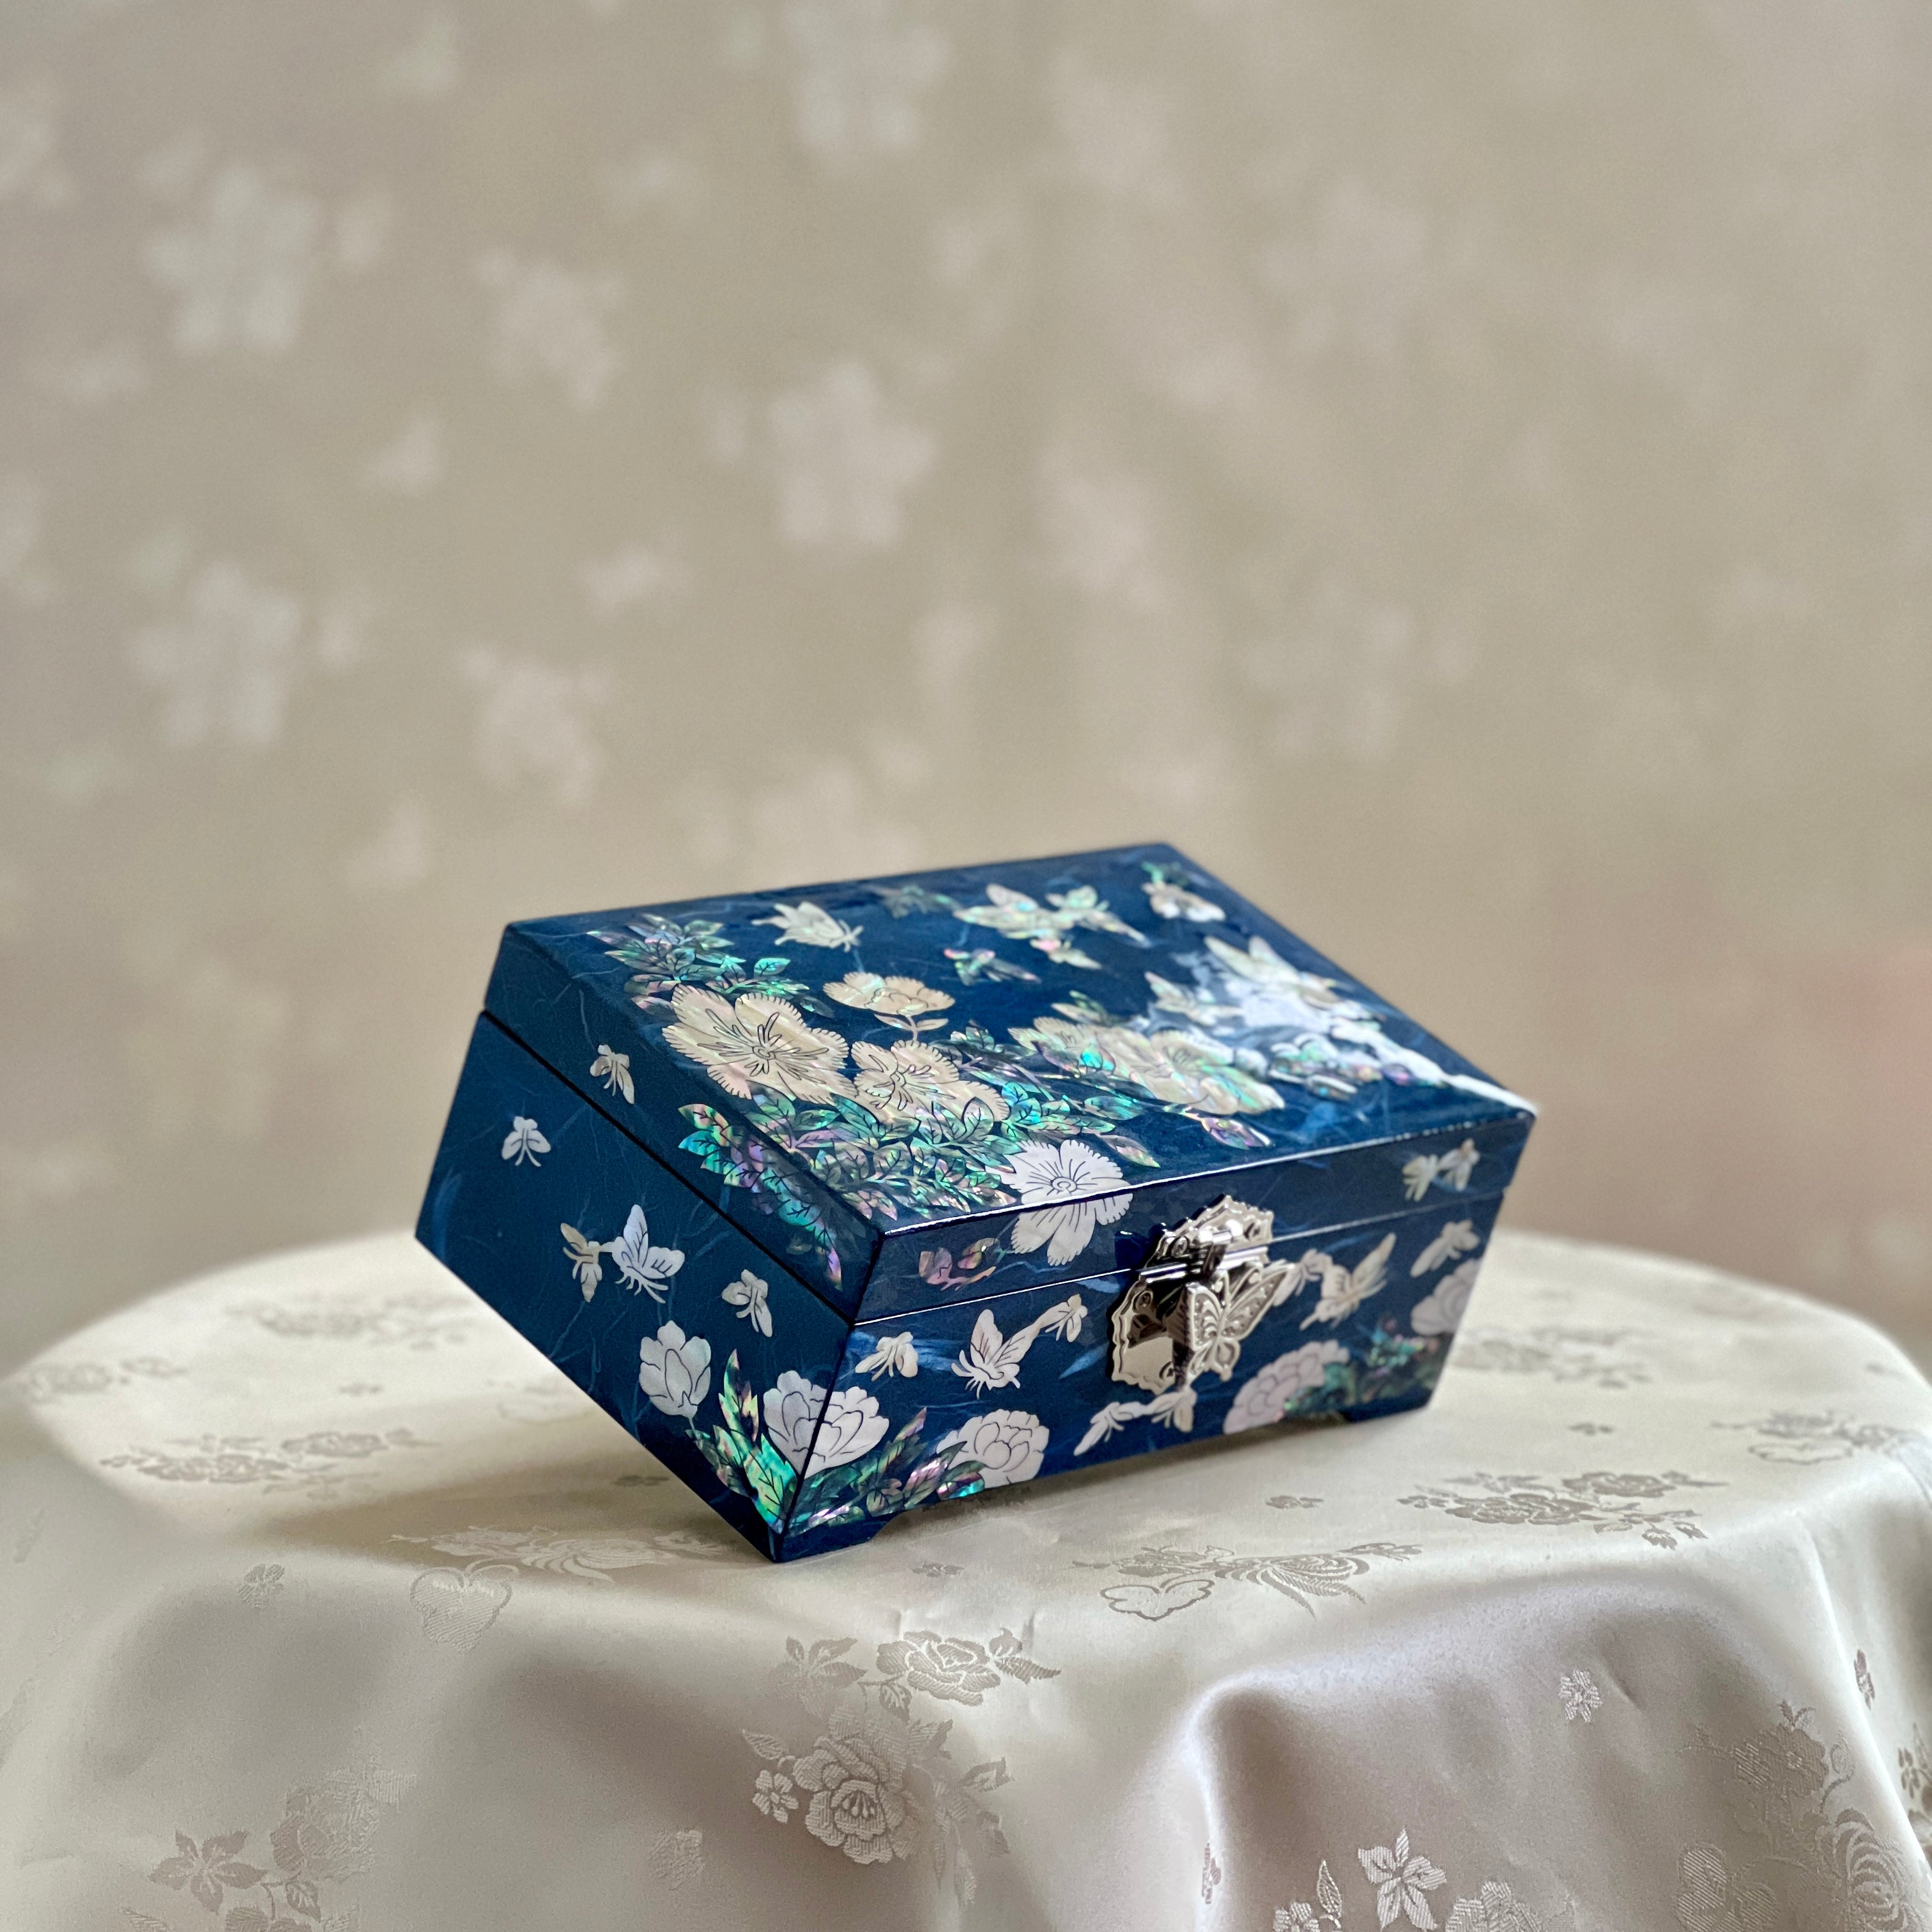 Side, front and upper view of Handmade Korean mother of pearl jewelry box with crane and pine pattern on navy paper-layered design, perfect for storing valuable jewelry.